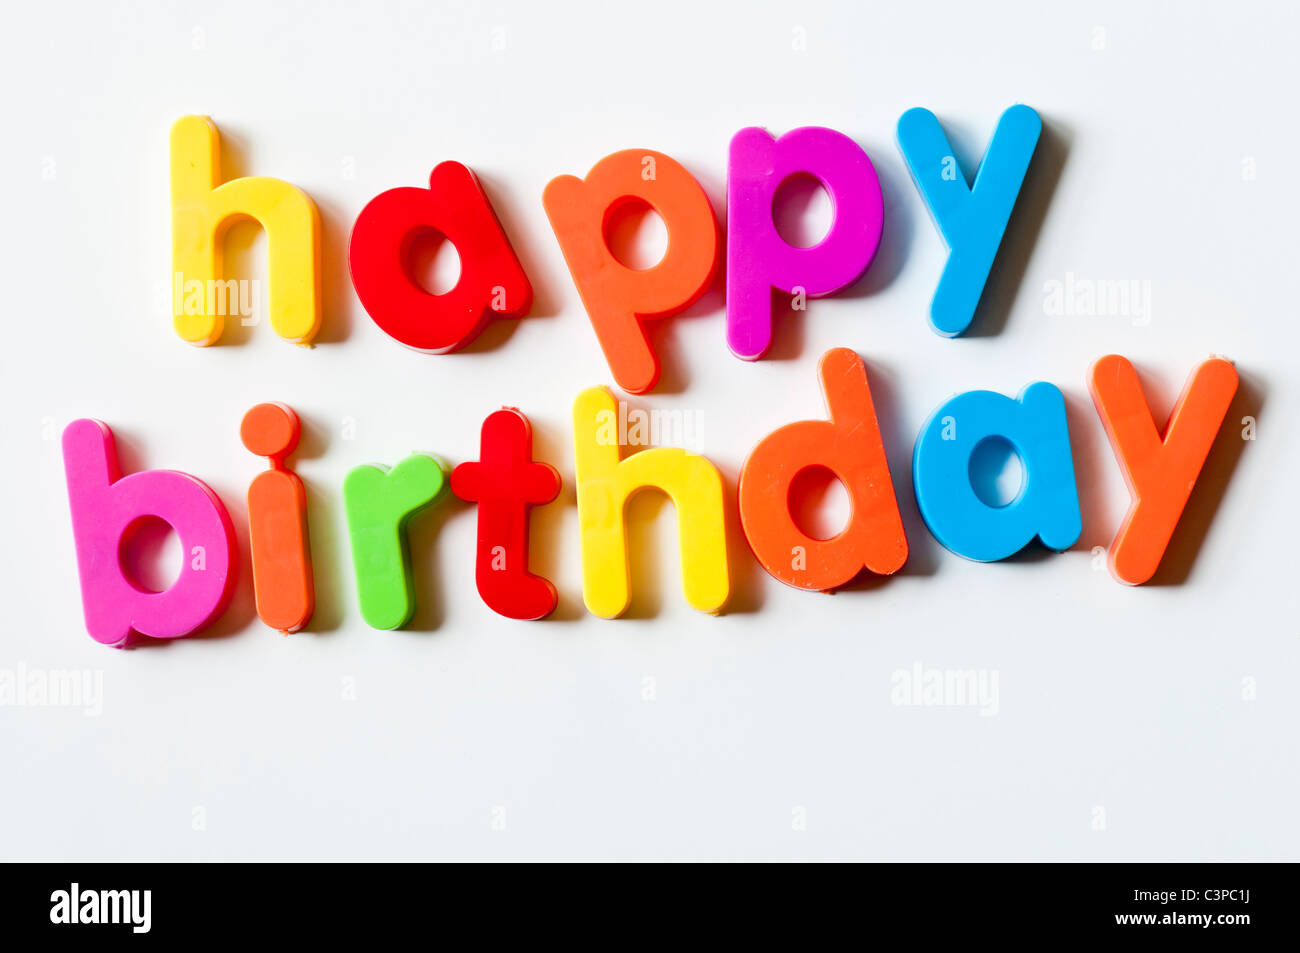 Fridge magnets magnetic letters spelling out 'happy birthday' Stock Photo